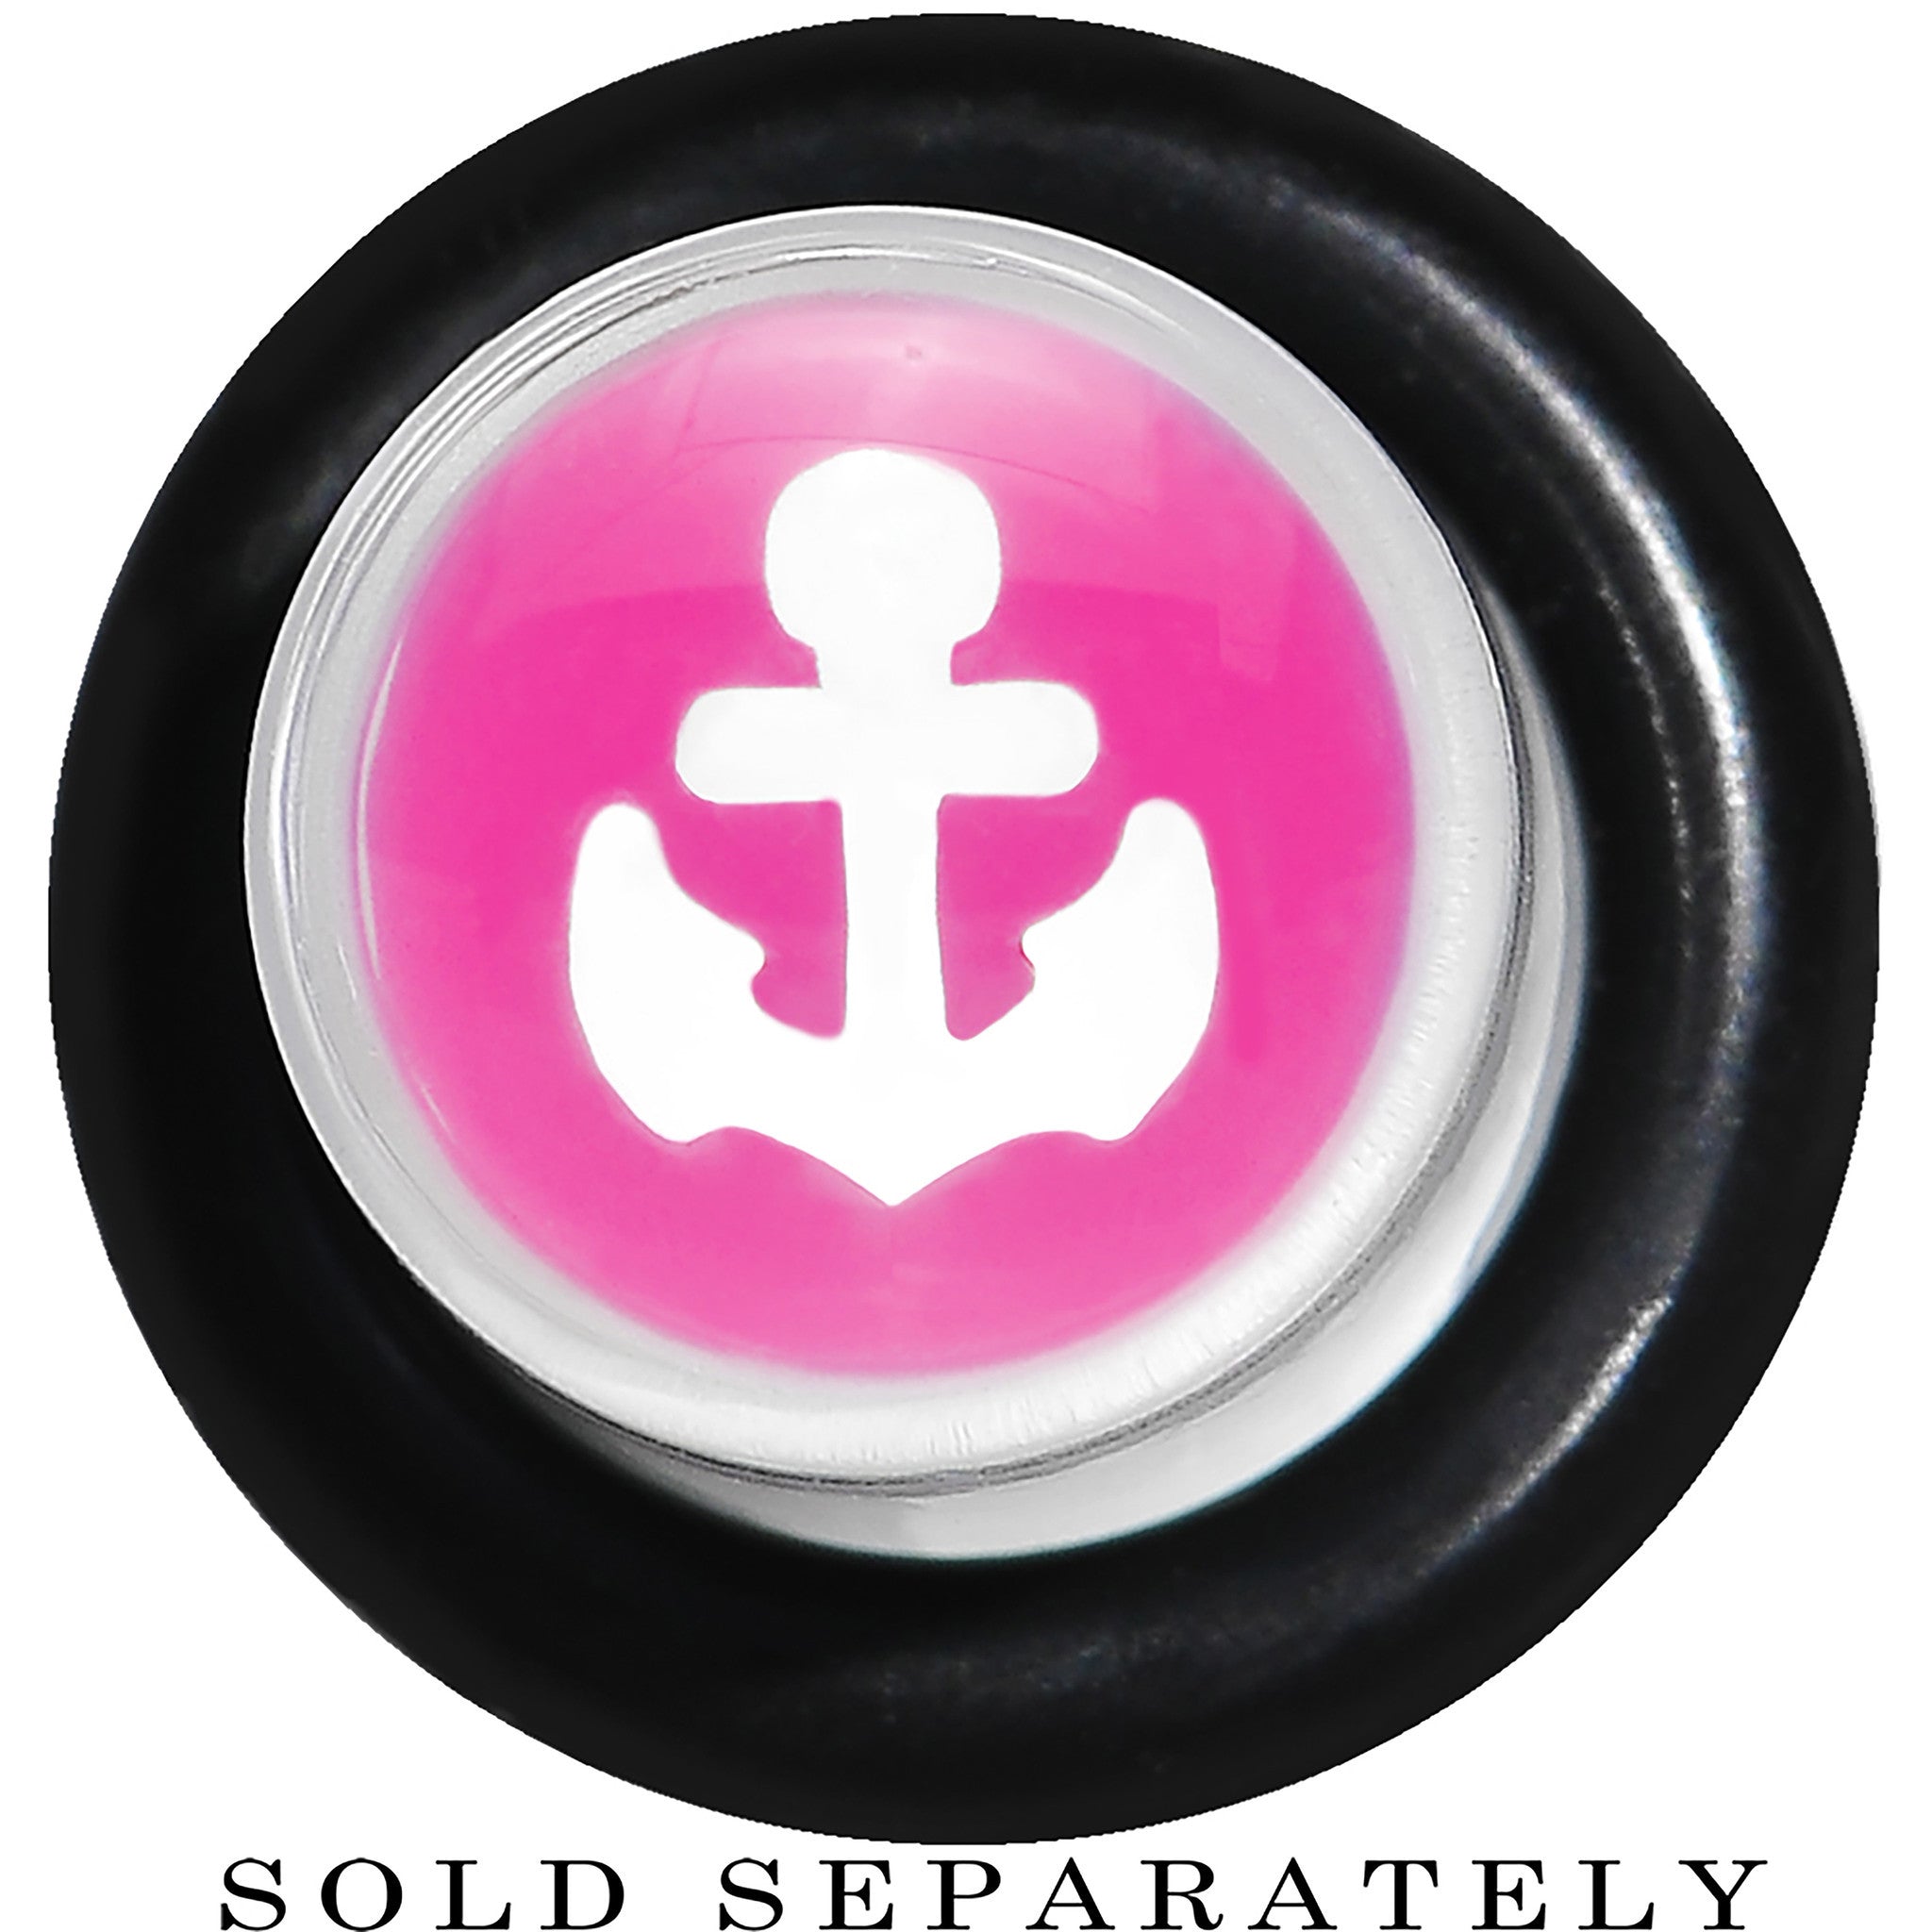 0 Gauge Clear Pink Acrylic Set Sail Nautical Anchor Taper